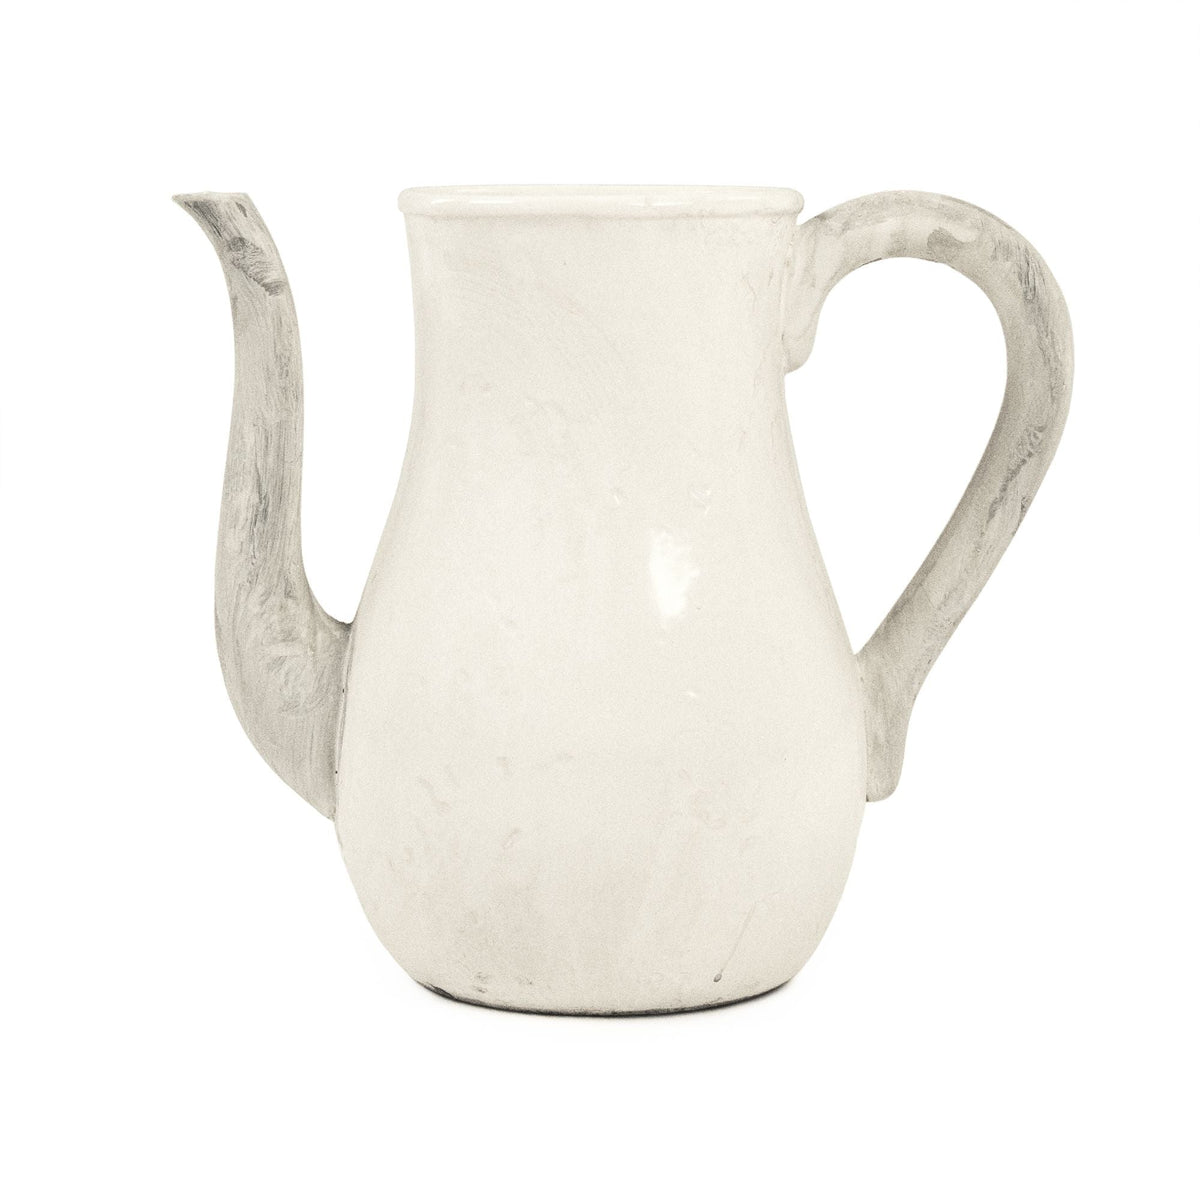 Distressed White Pitcher (9824S A25A) by Zentique